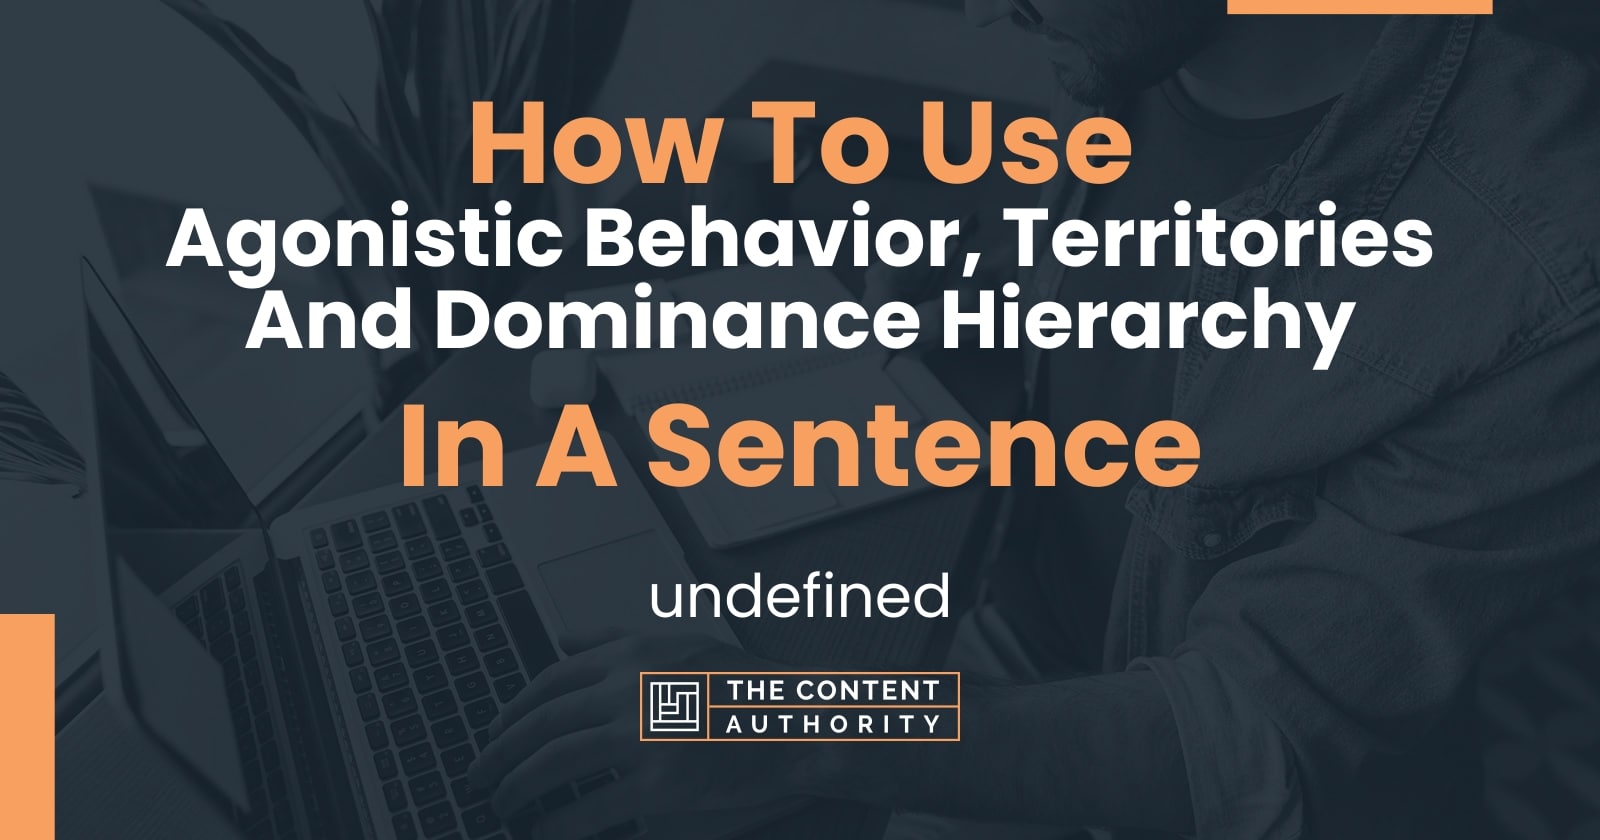 How To Use Agonistic Behavior Territories And Dominance Hierarchy In A Sentence 